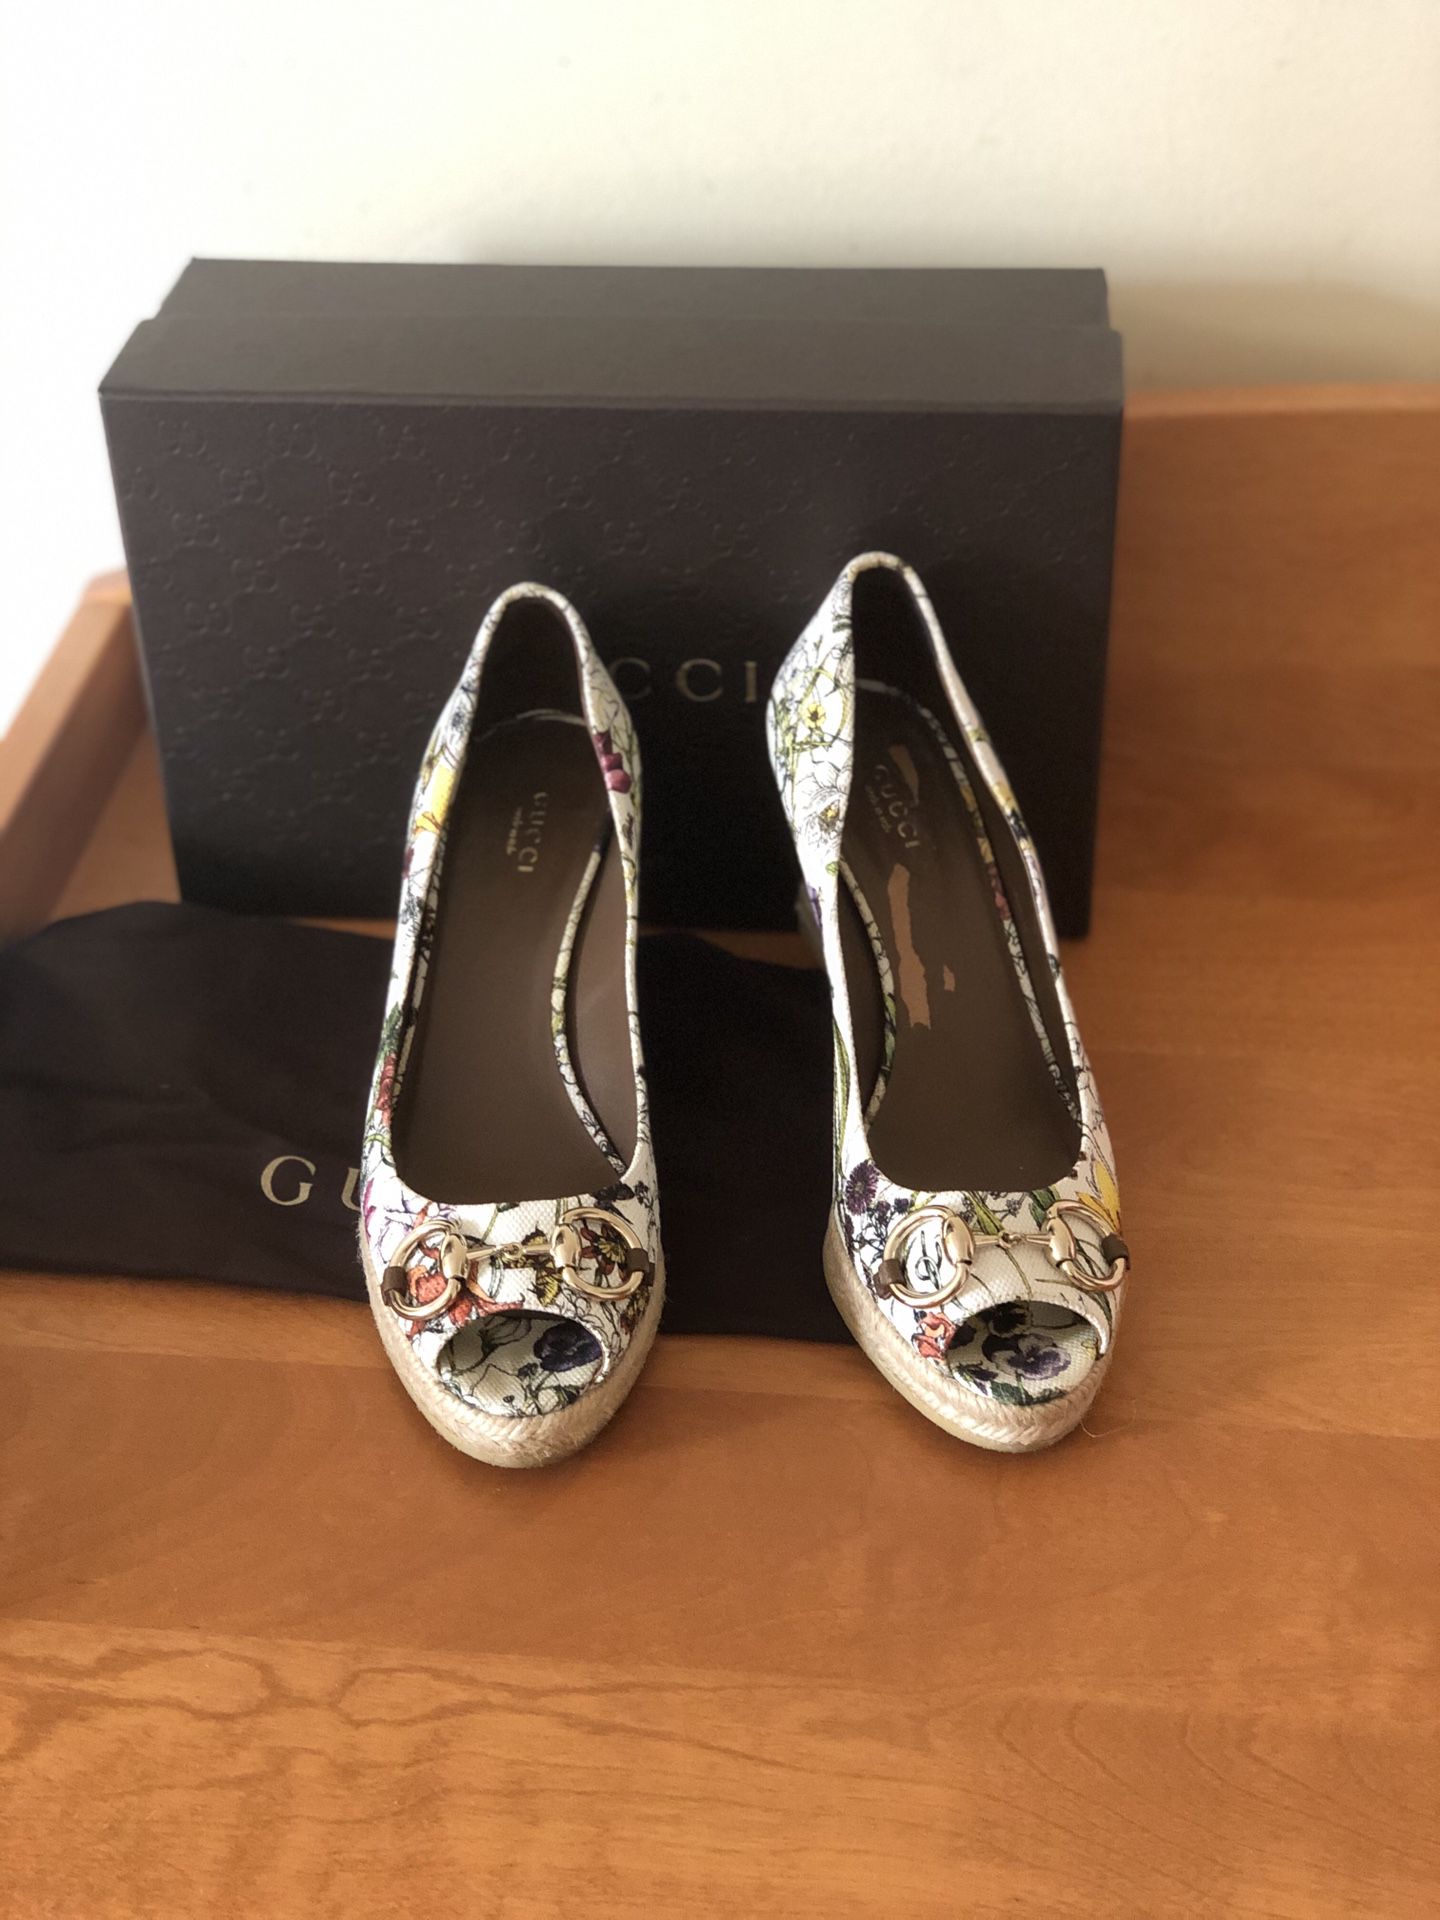 Gucci women wedge shoes size 8.5